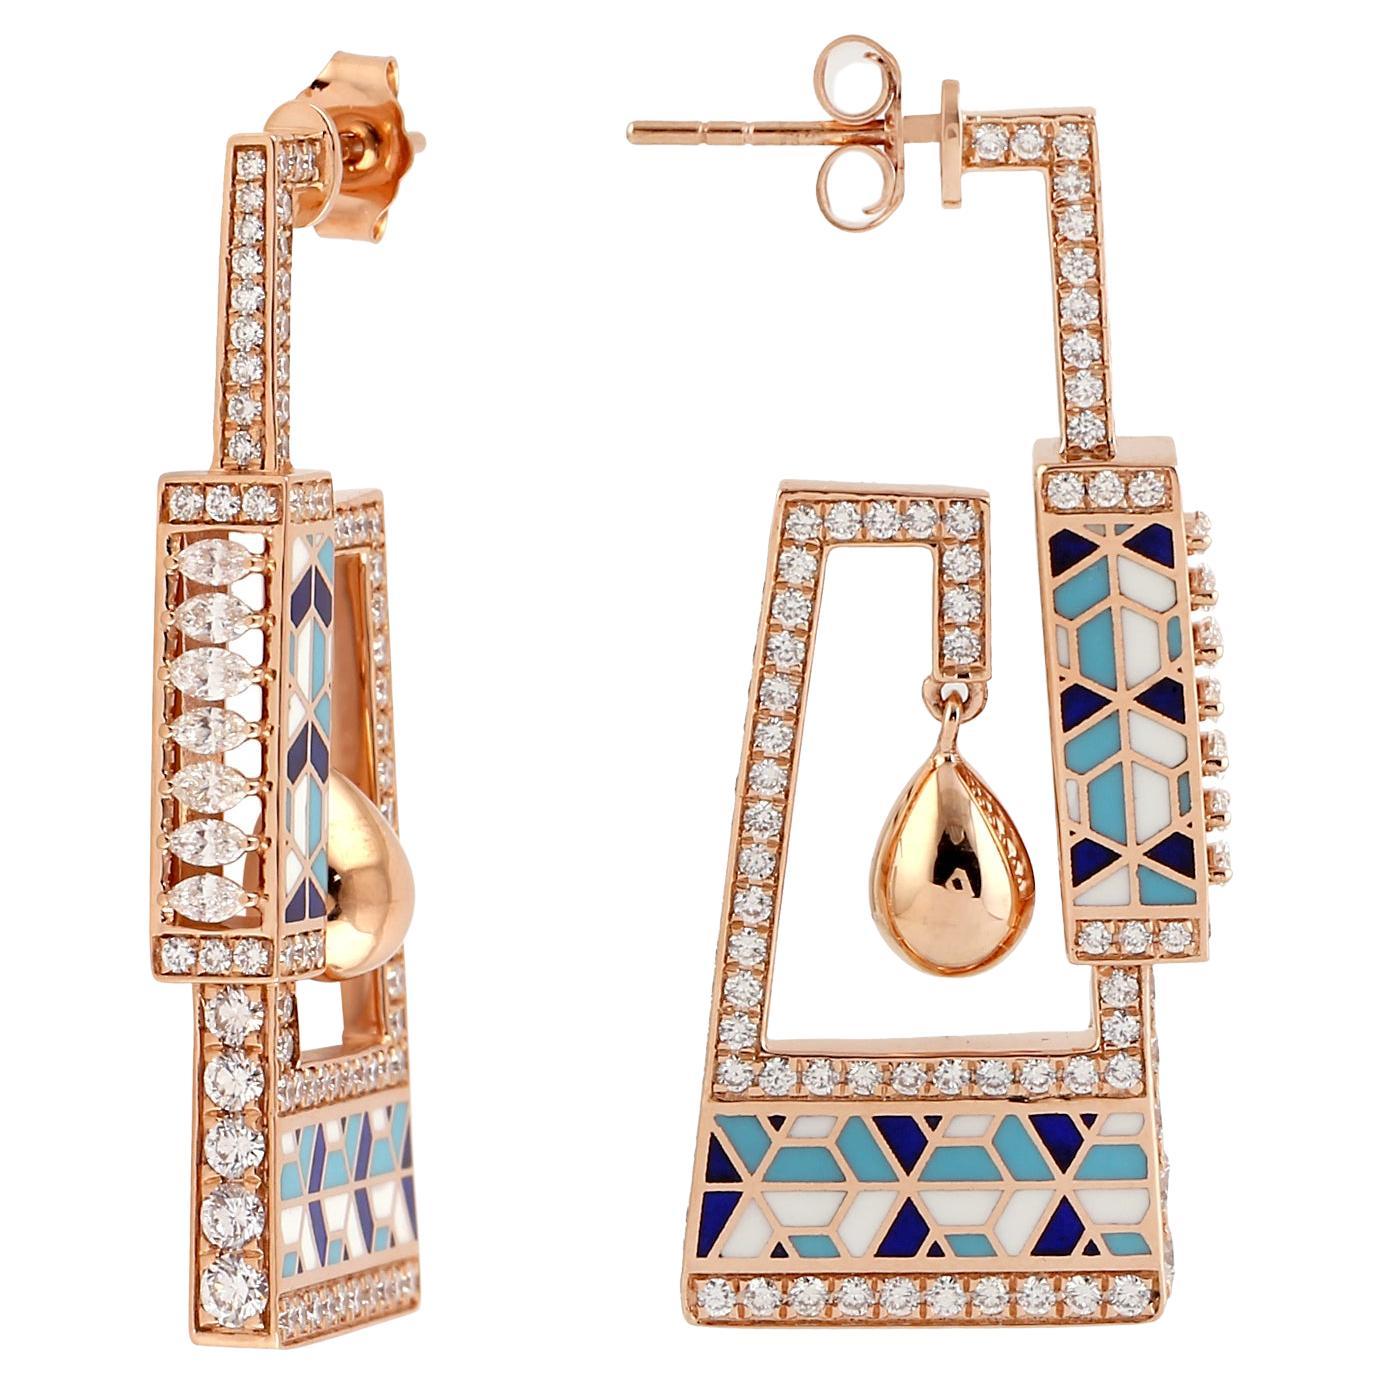 Moroccan Style Ceramic Tile Inlay Work on Unique Architectural Design Earrings For Sale